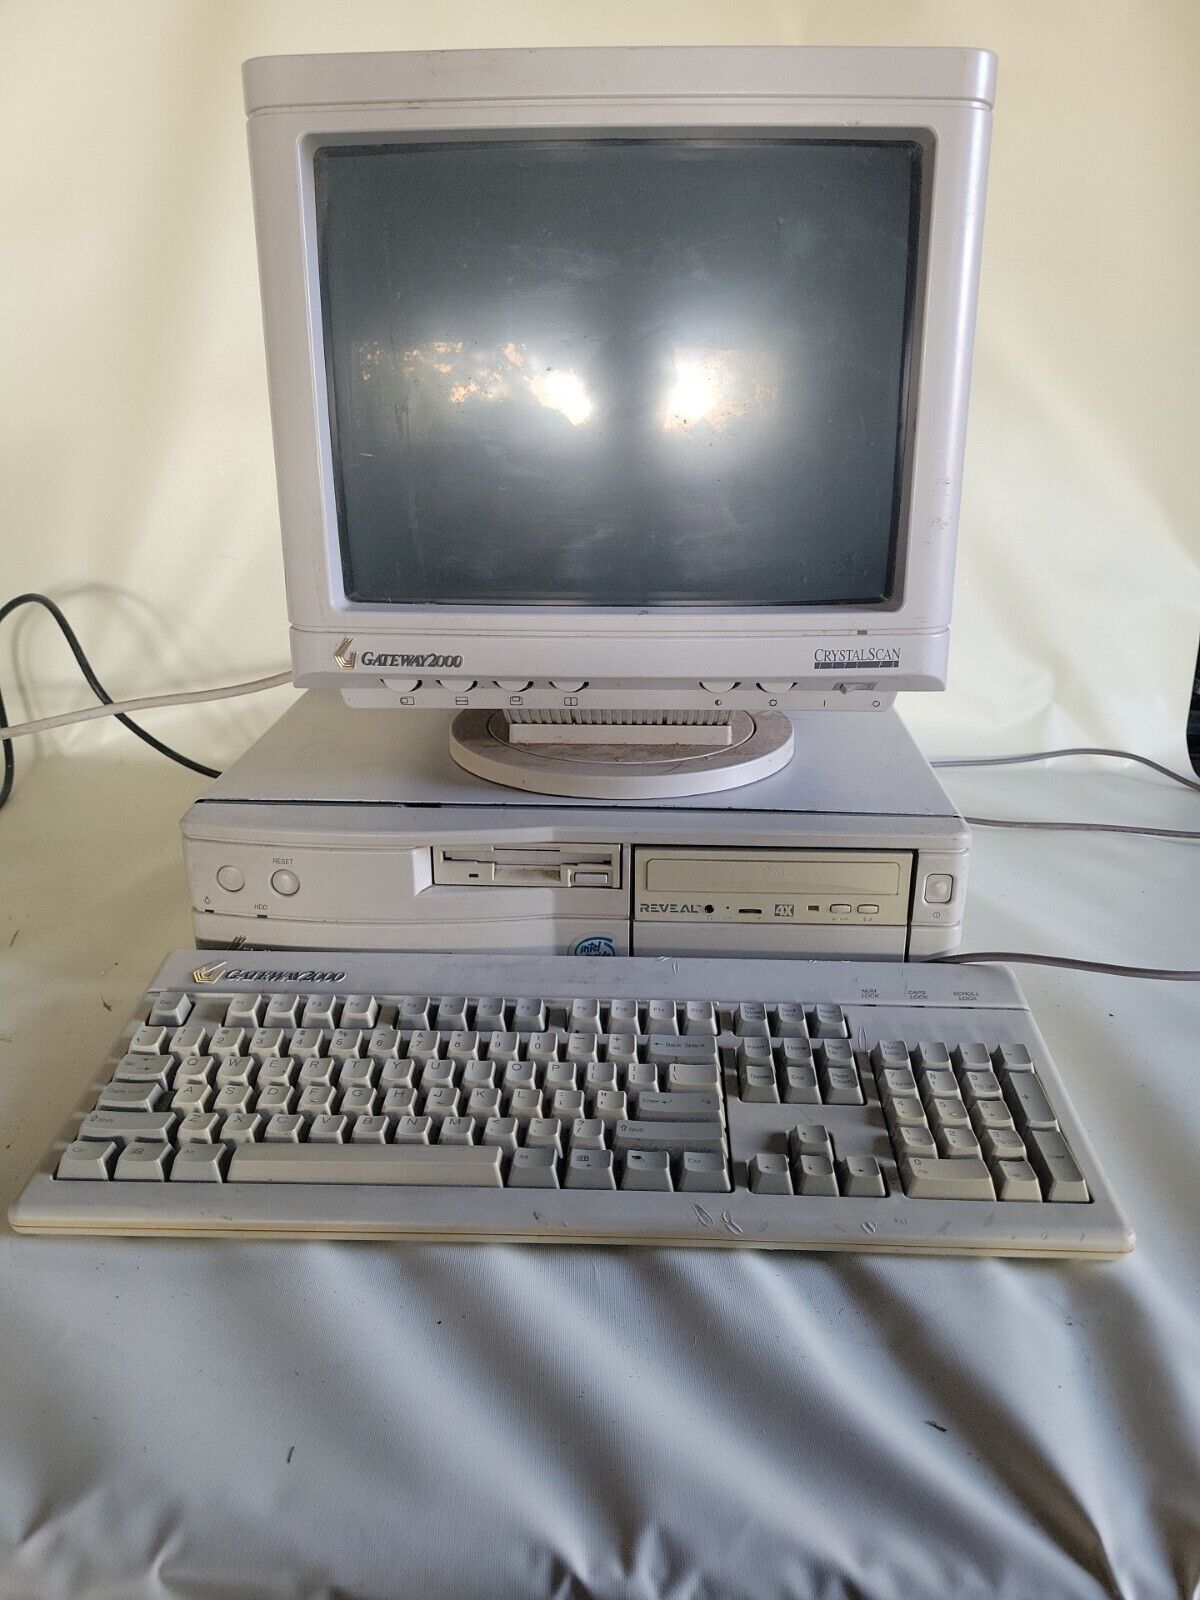 Gateway 2000 4SX-33 Vintage Computer With Monitor And Keyboard *parts*